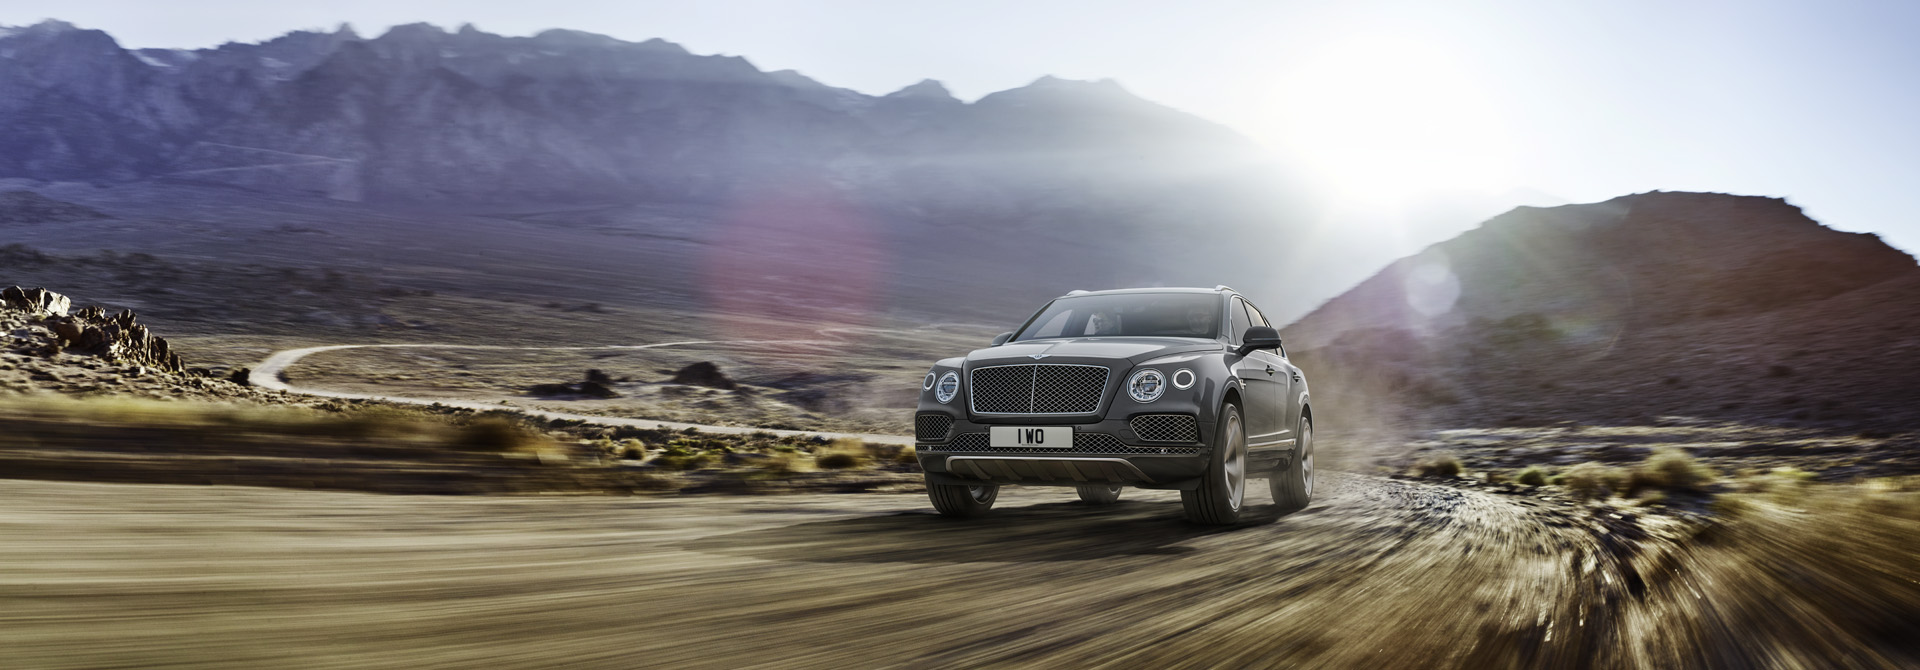 That Outdoors Life: 4 Luxury SUVs Ready to Handle All Your Adventure Gear Bentley Motors